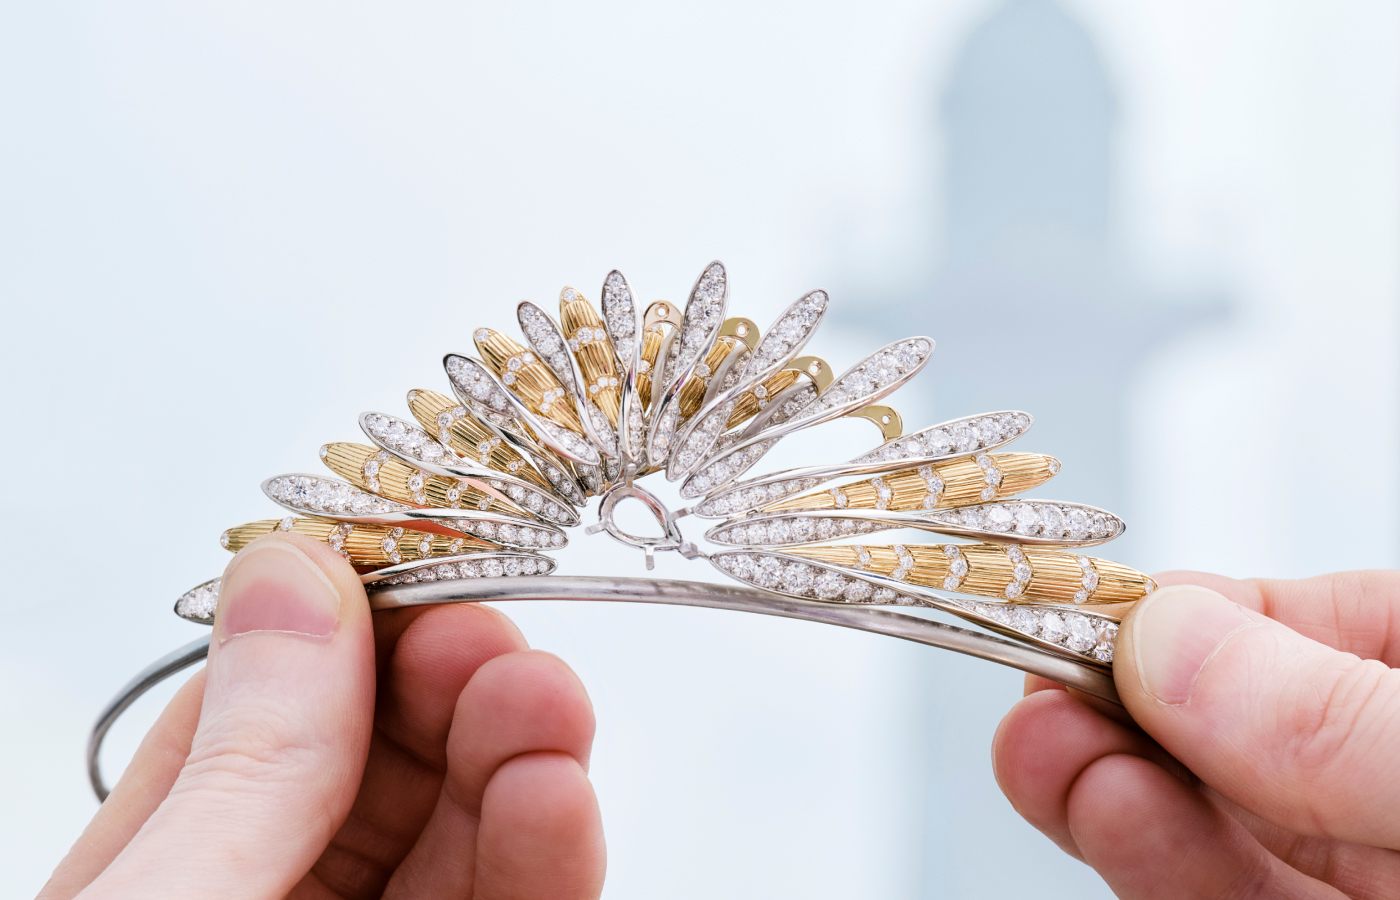 Making of the Chaumet Plume d'or tiara in platinum, white gold, rose gold and diamond from the Un air de Chaumet collection